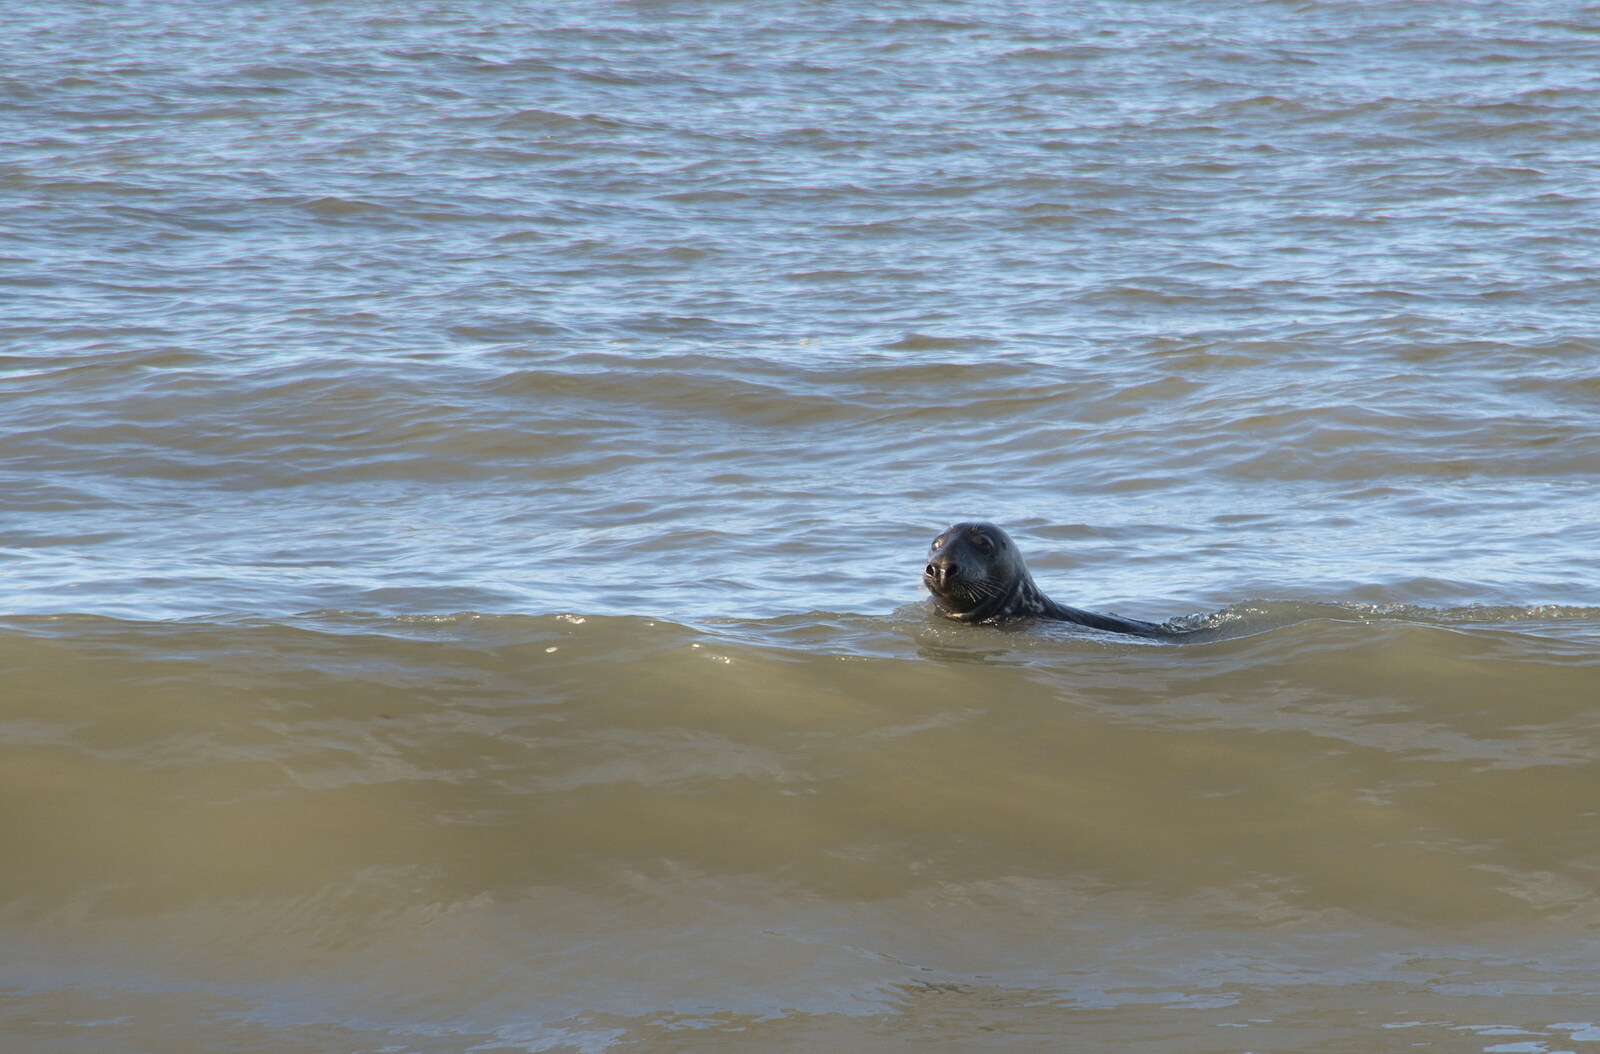 A seal bobs about in the sea from Camping in the Dunes, Waxham Sands, Norfolk - 9th July 2022